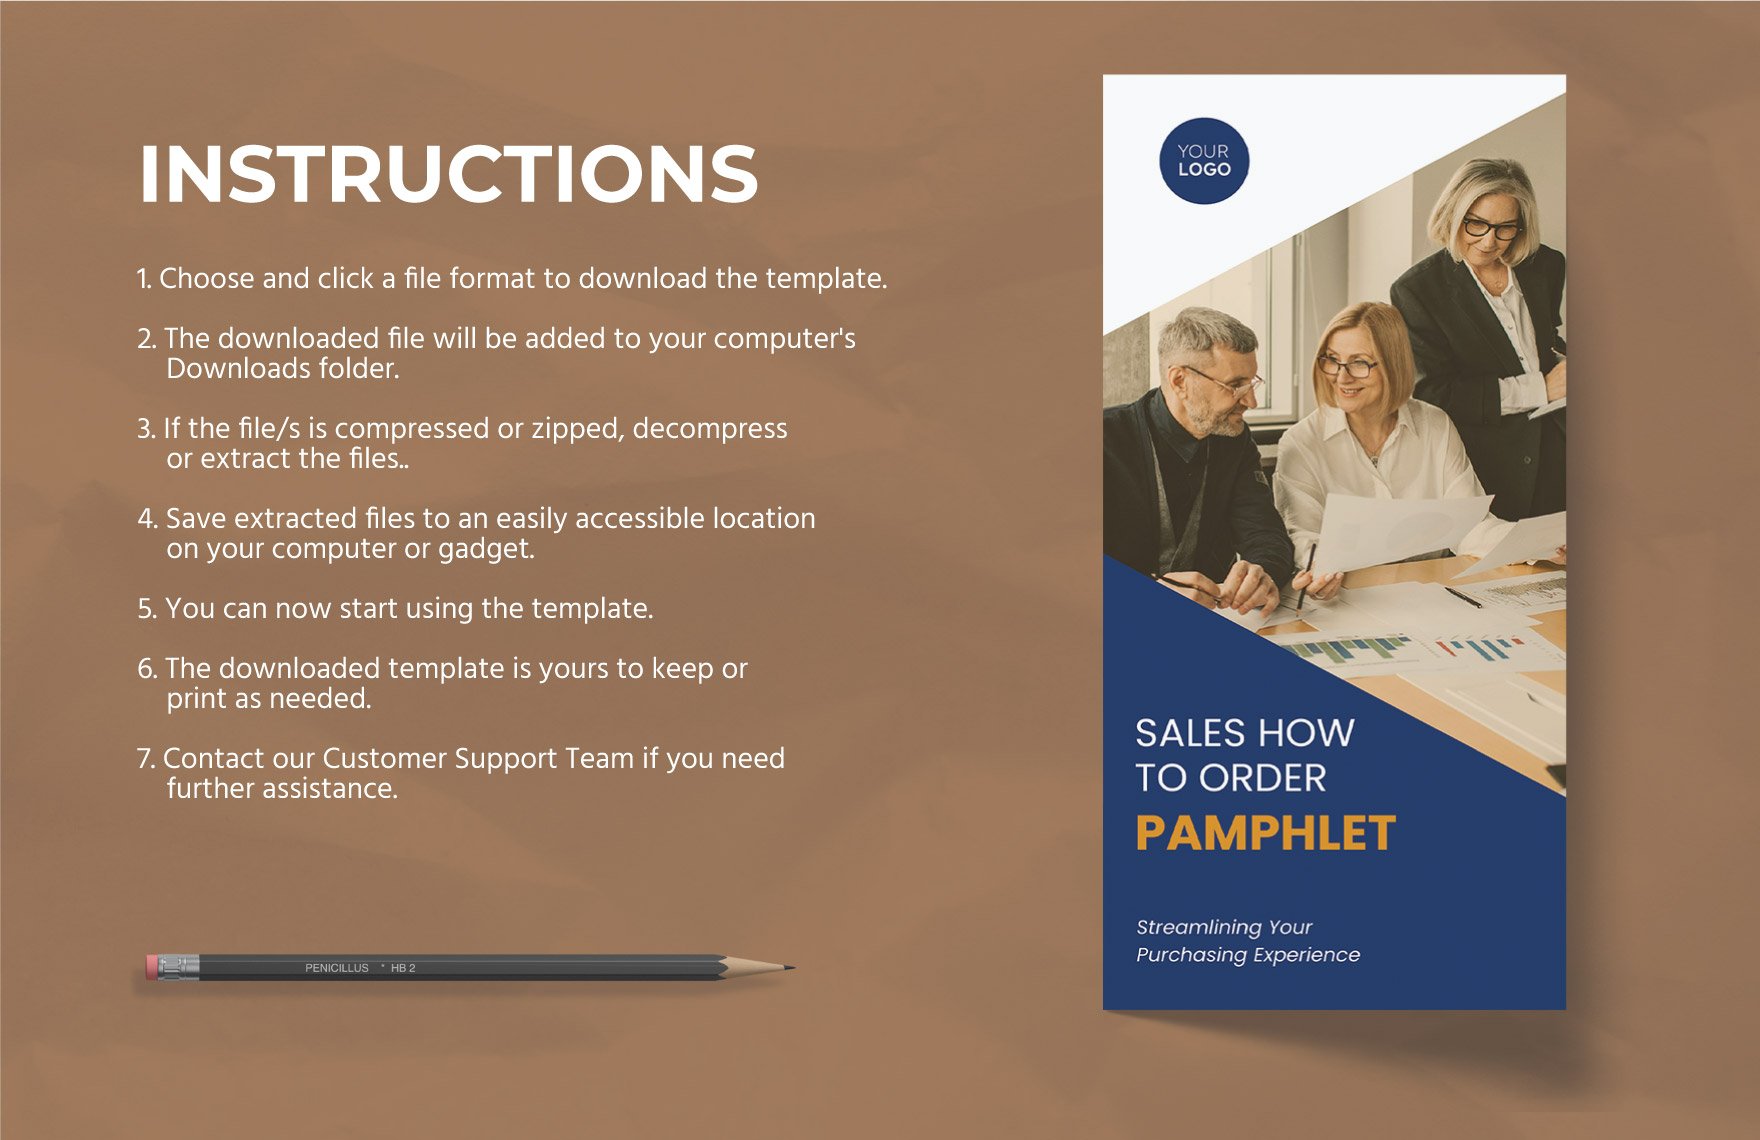 Sales How to Order Pamphlet Template